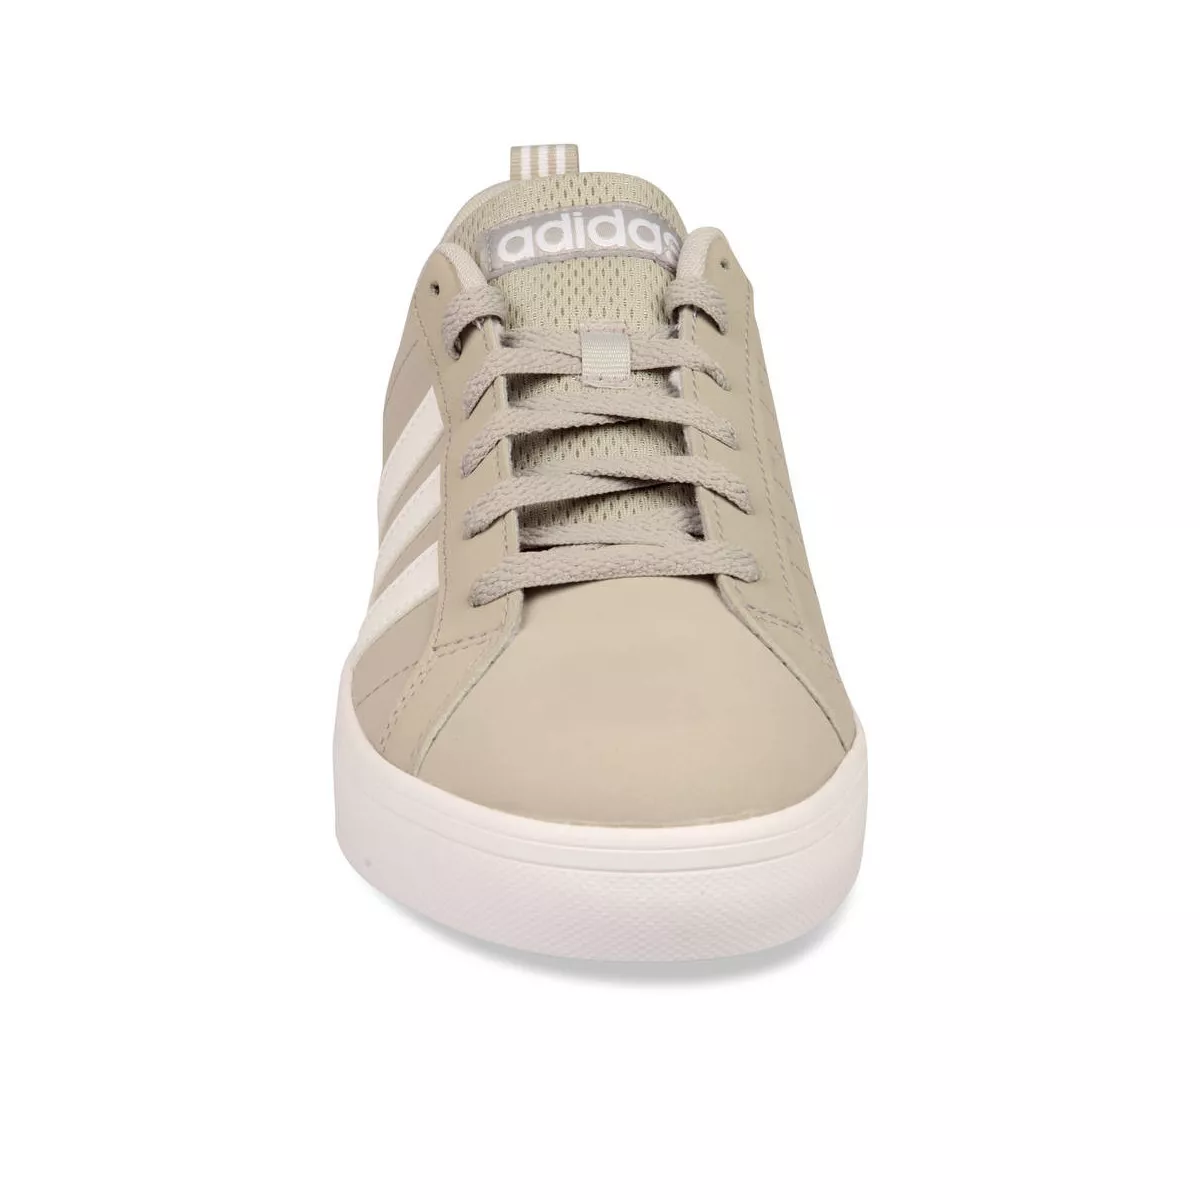 Buy Adidas Vs Pace Men Casual Sneakers at Amazon.in